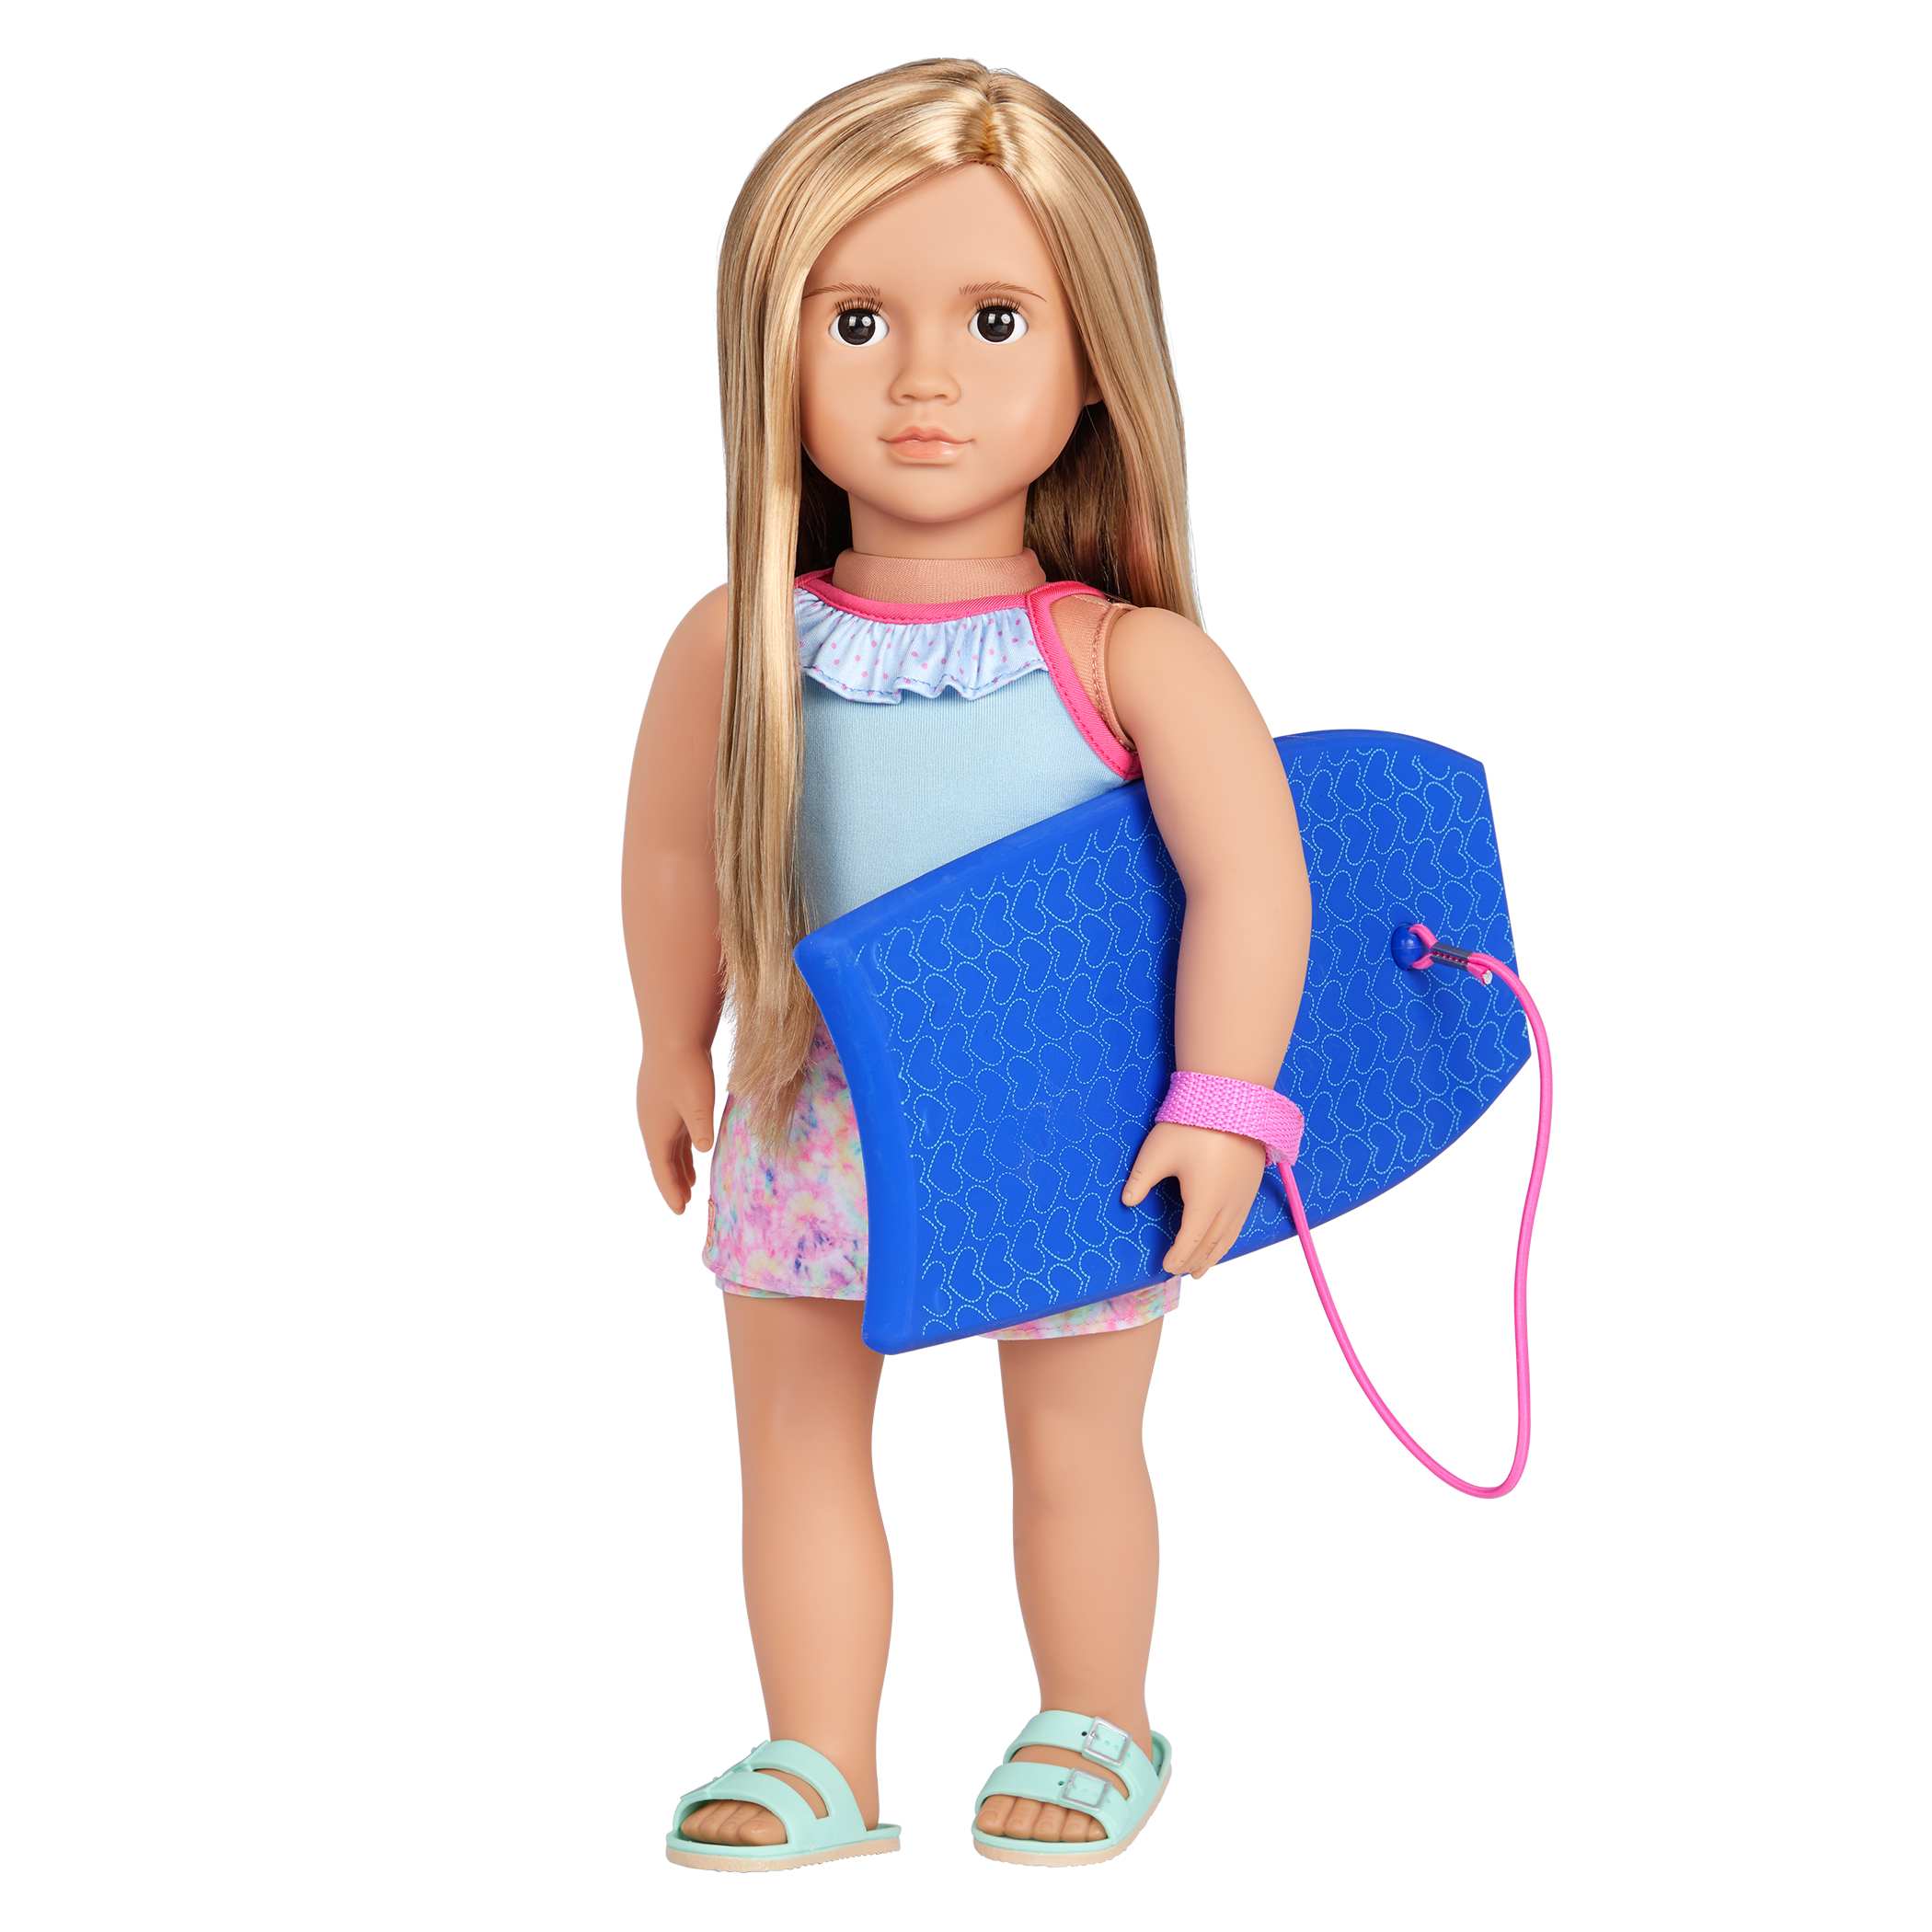 Shop Our Generation Coral Surfer Doll - Our Generation, delivered to your  home